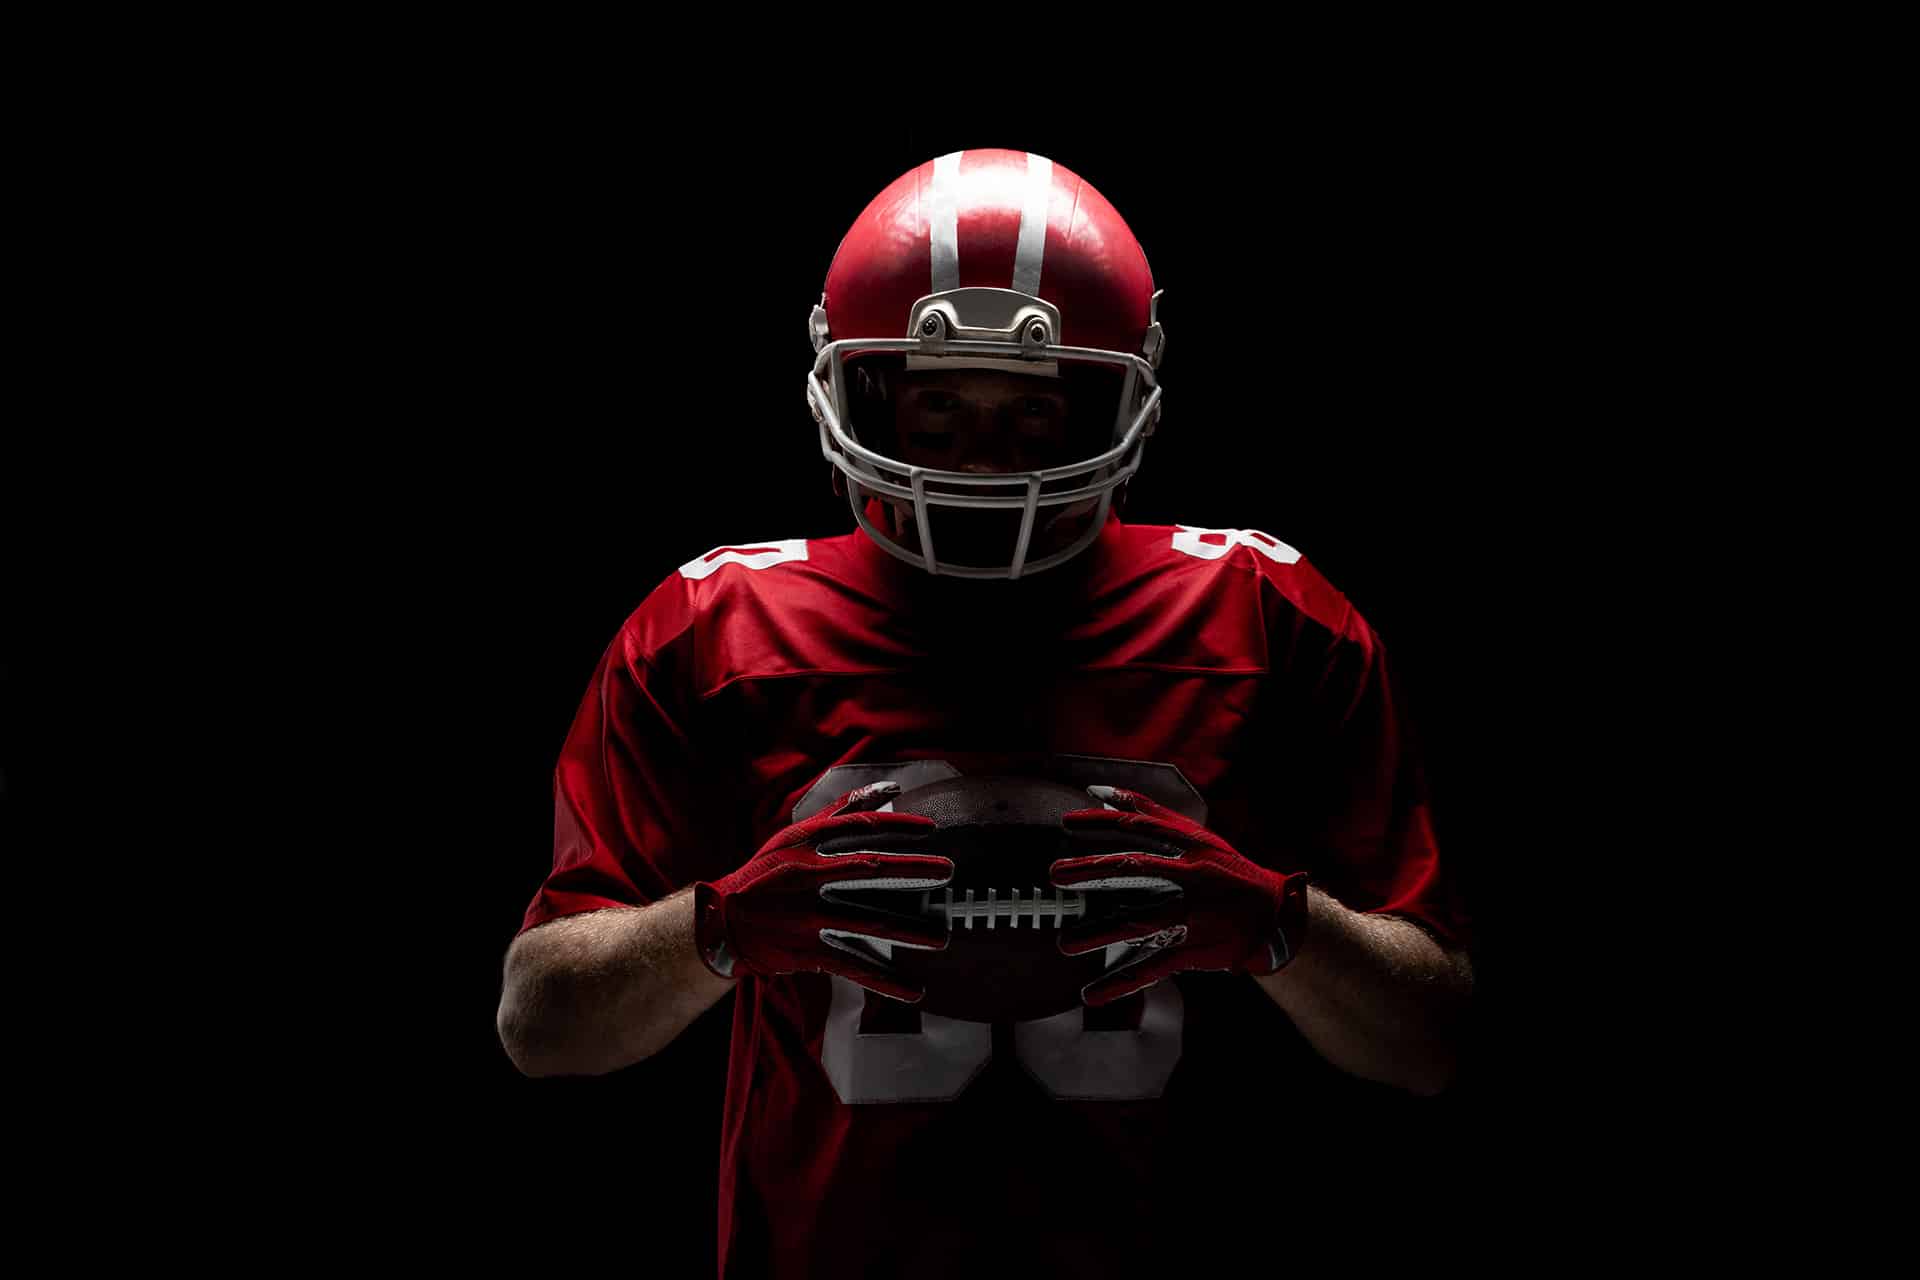 American football player standing with rugby helmet and ball against black background. Strong American Football Player concept for Championship Football Tournament